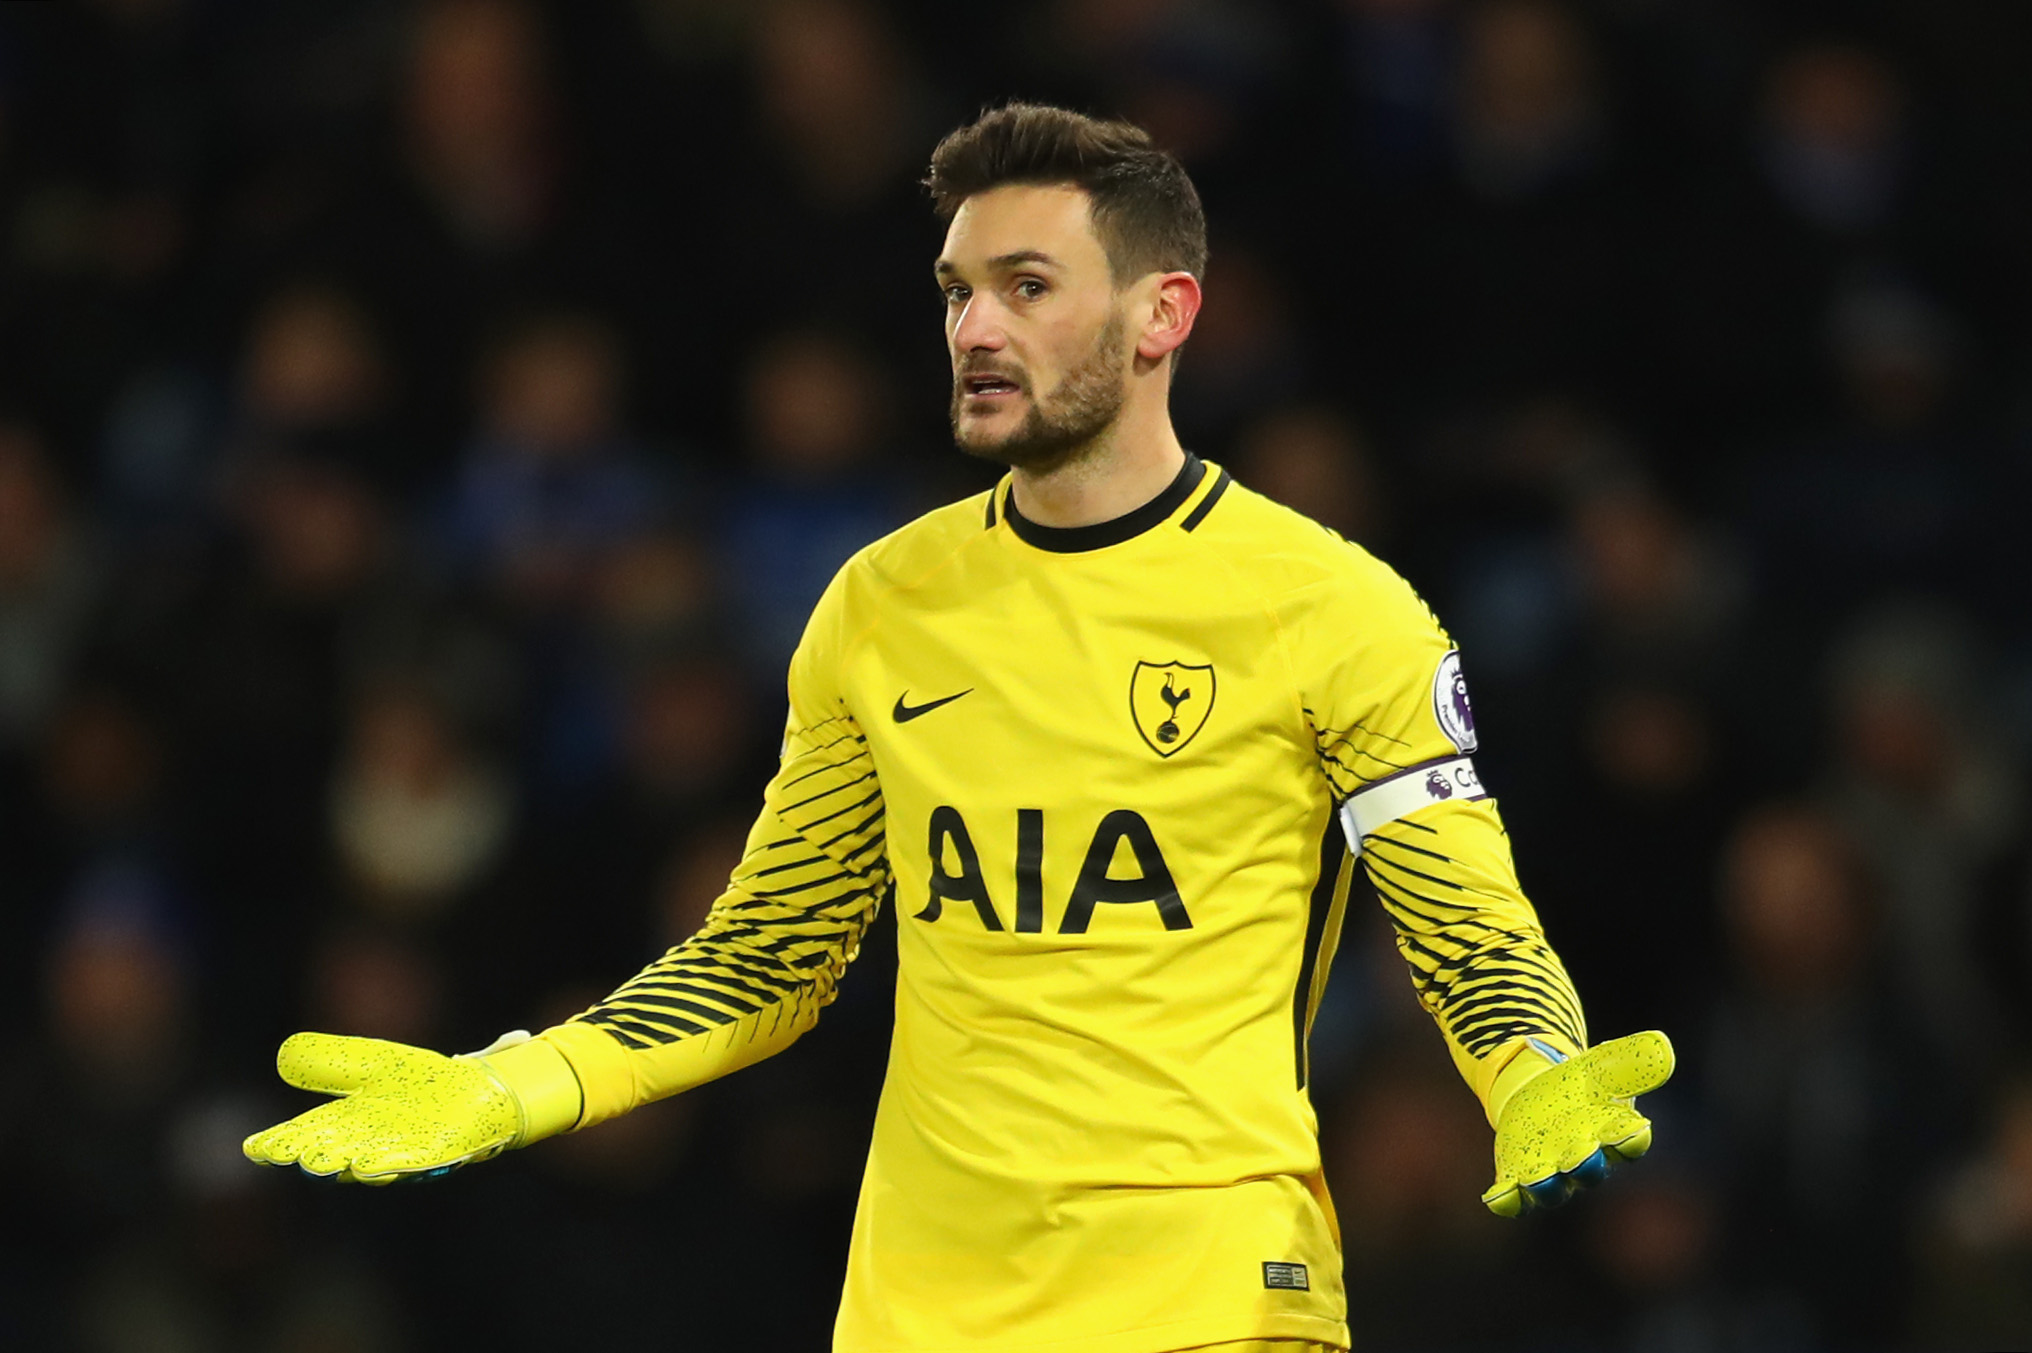 LEICESTER, ENGLAND - NOVEMBER 28:  Hugo Lloris of Tottenham Hotspur reacts  during the Premier League match between Leicester City and Tottenham Hotspur at The King Power Stadium on November 28, 2017 in Leicester, England.  (Photo by Catherine Ivill/Getty Images)